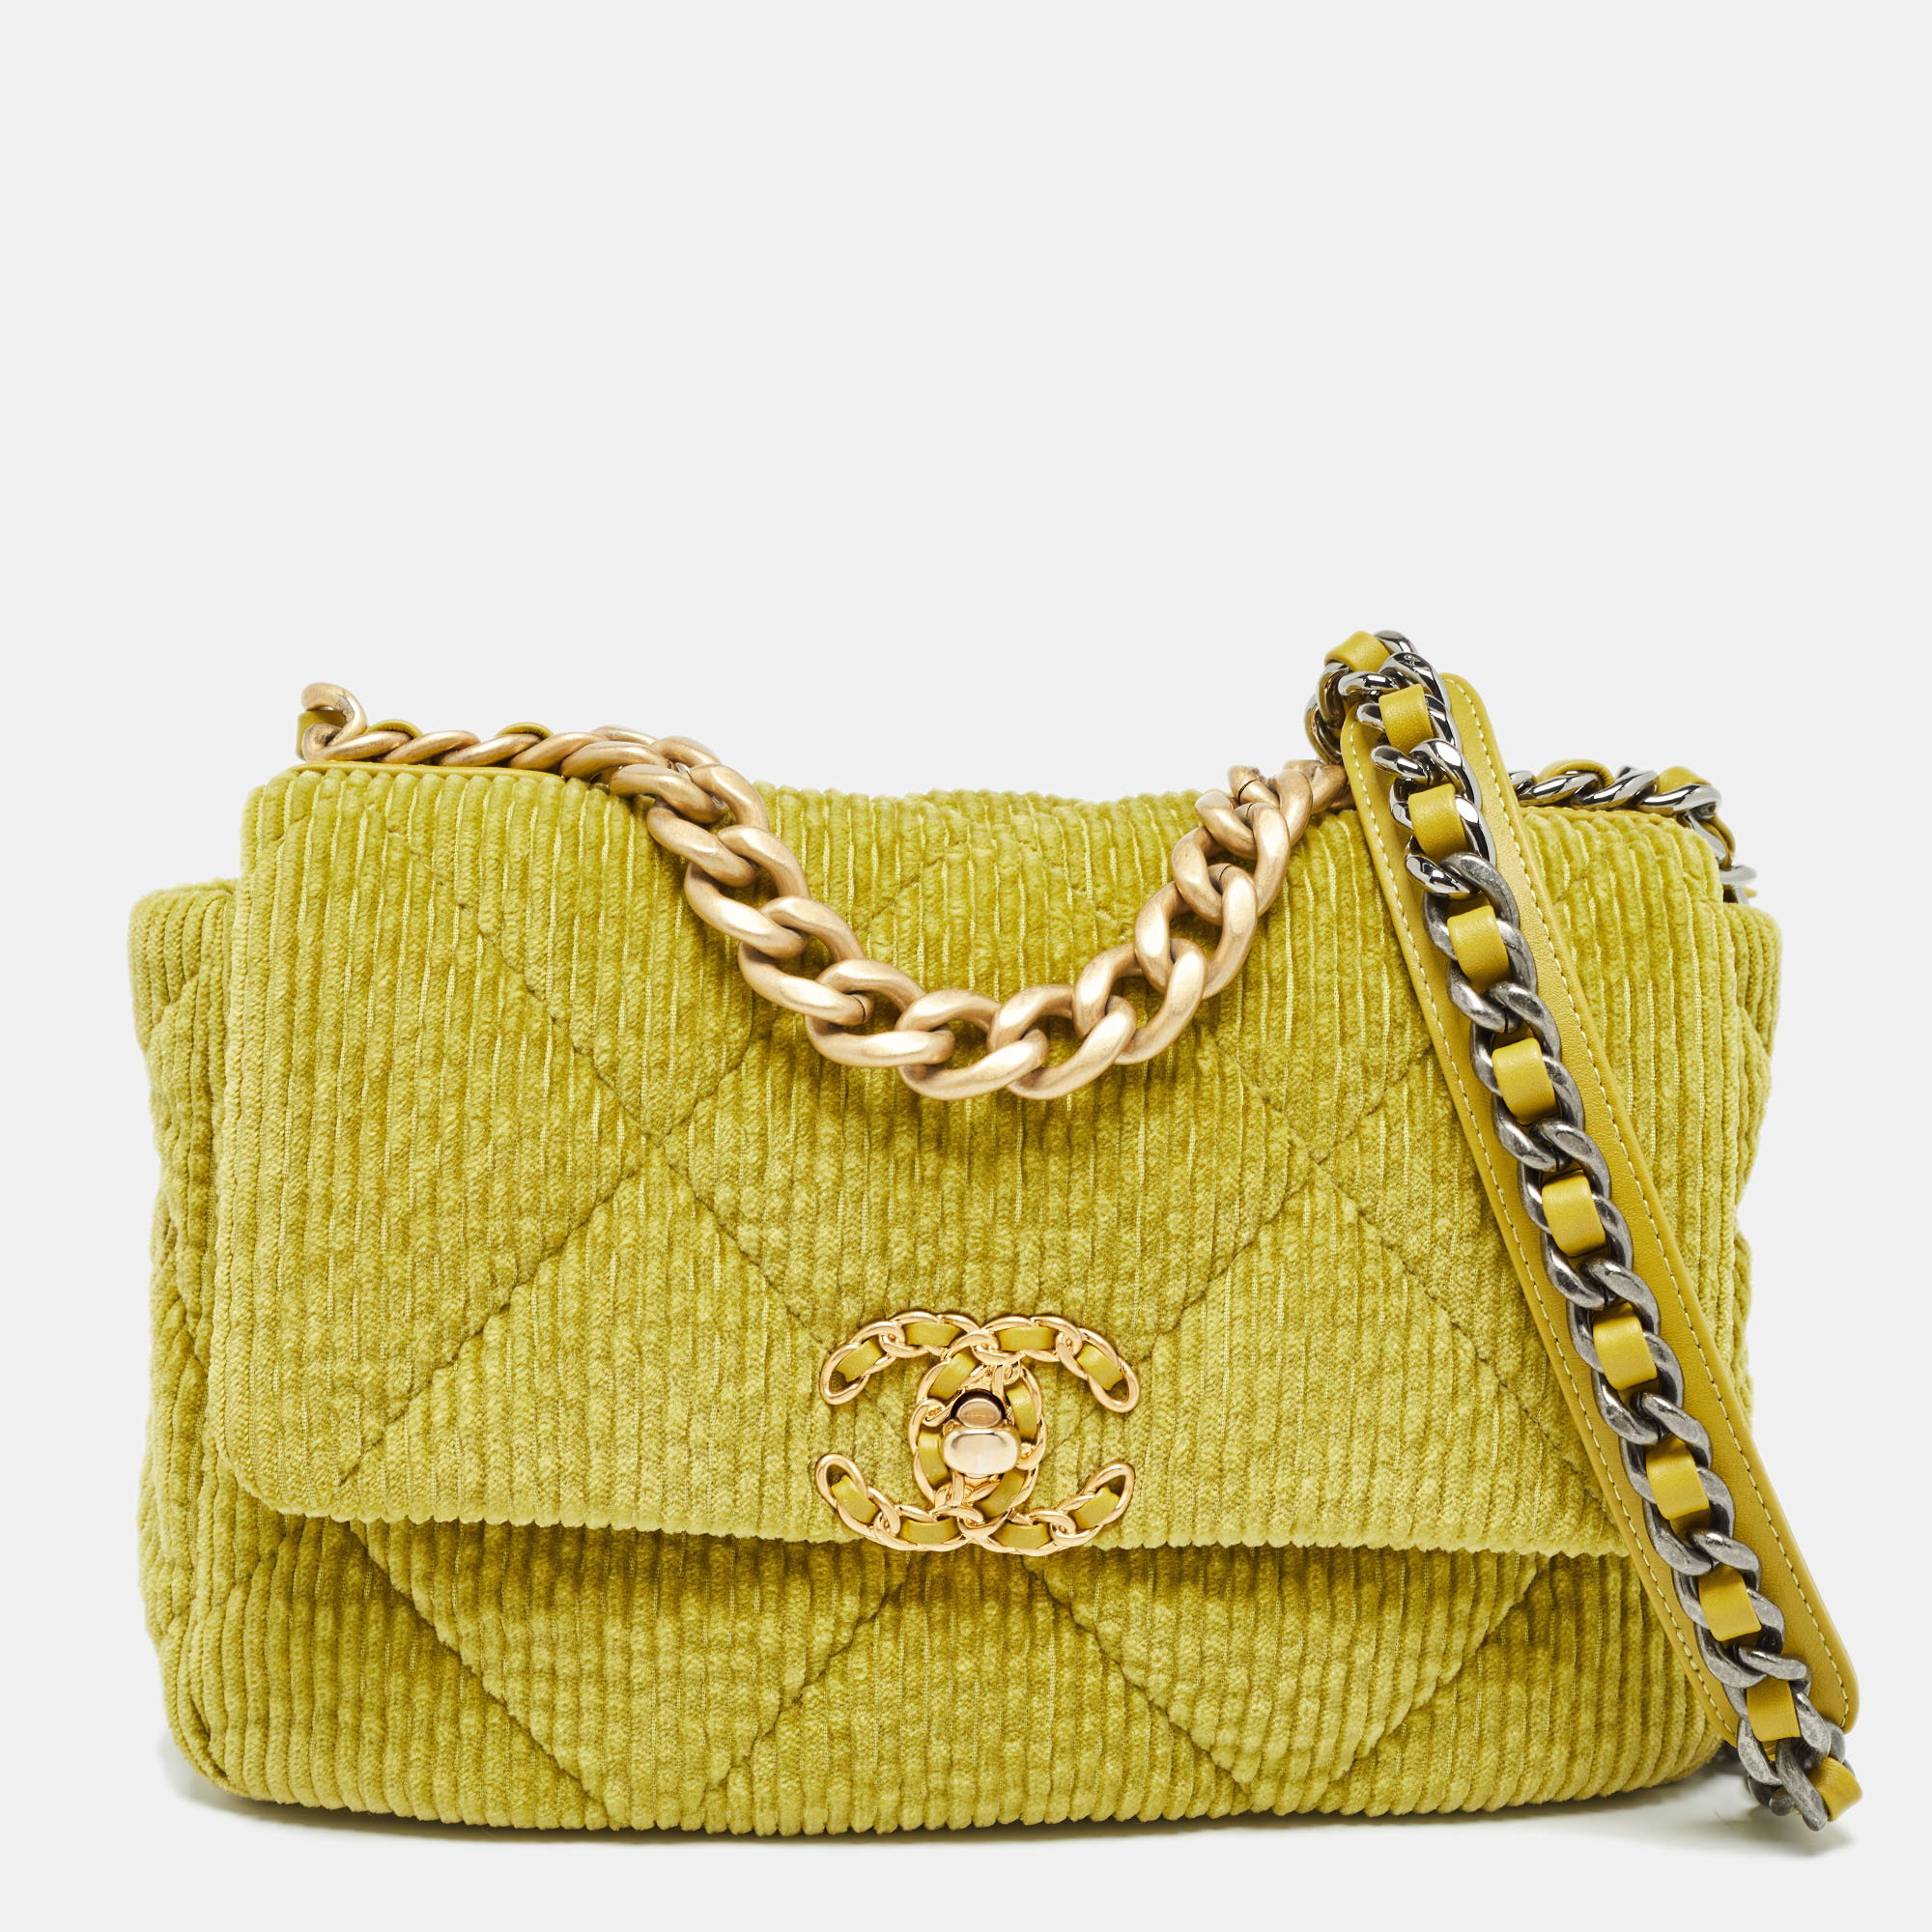 Chanel green quilted corduroy medium 19 flap bag